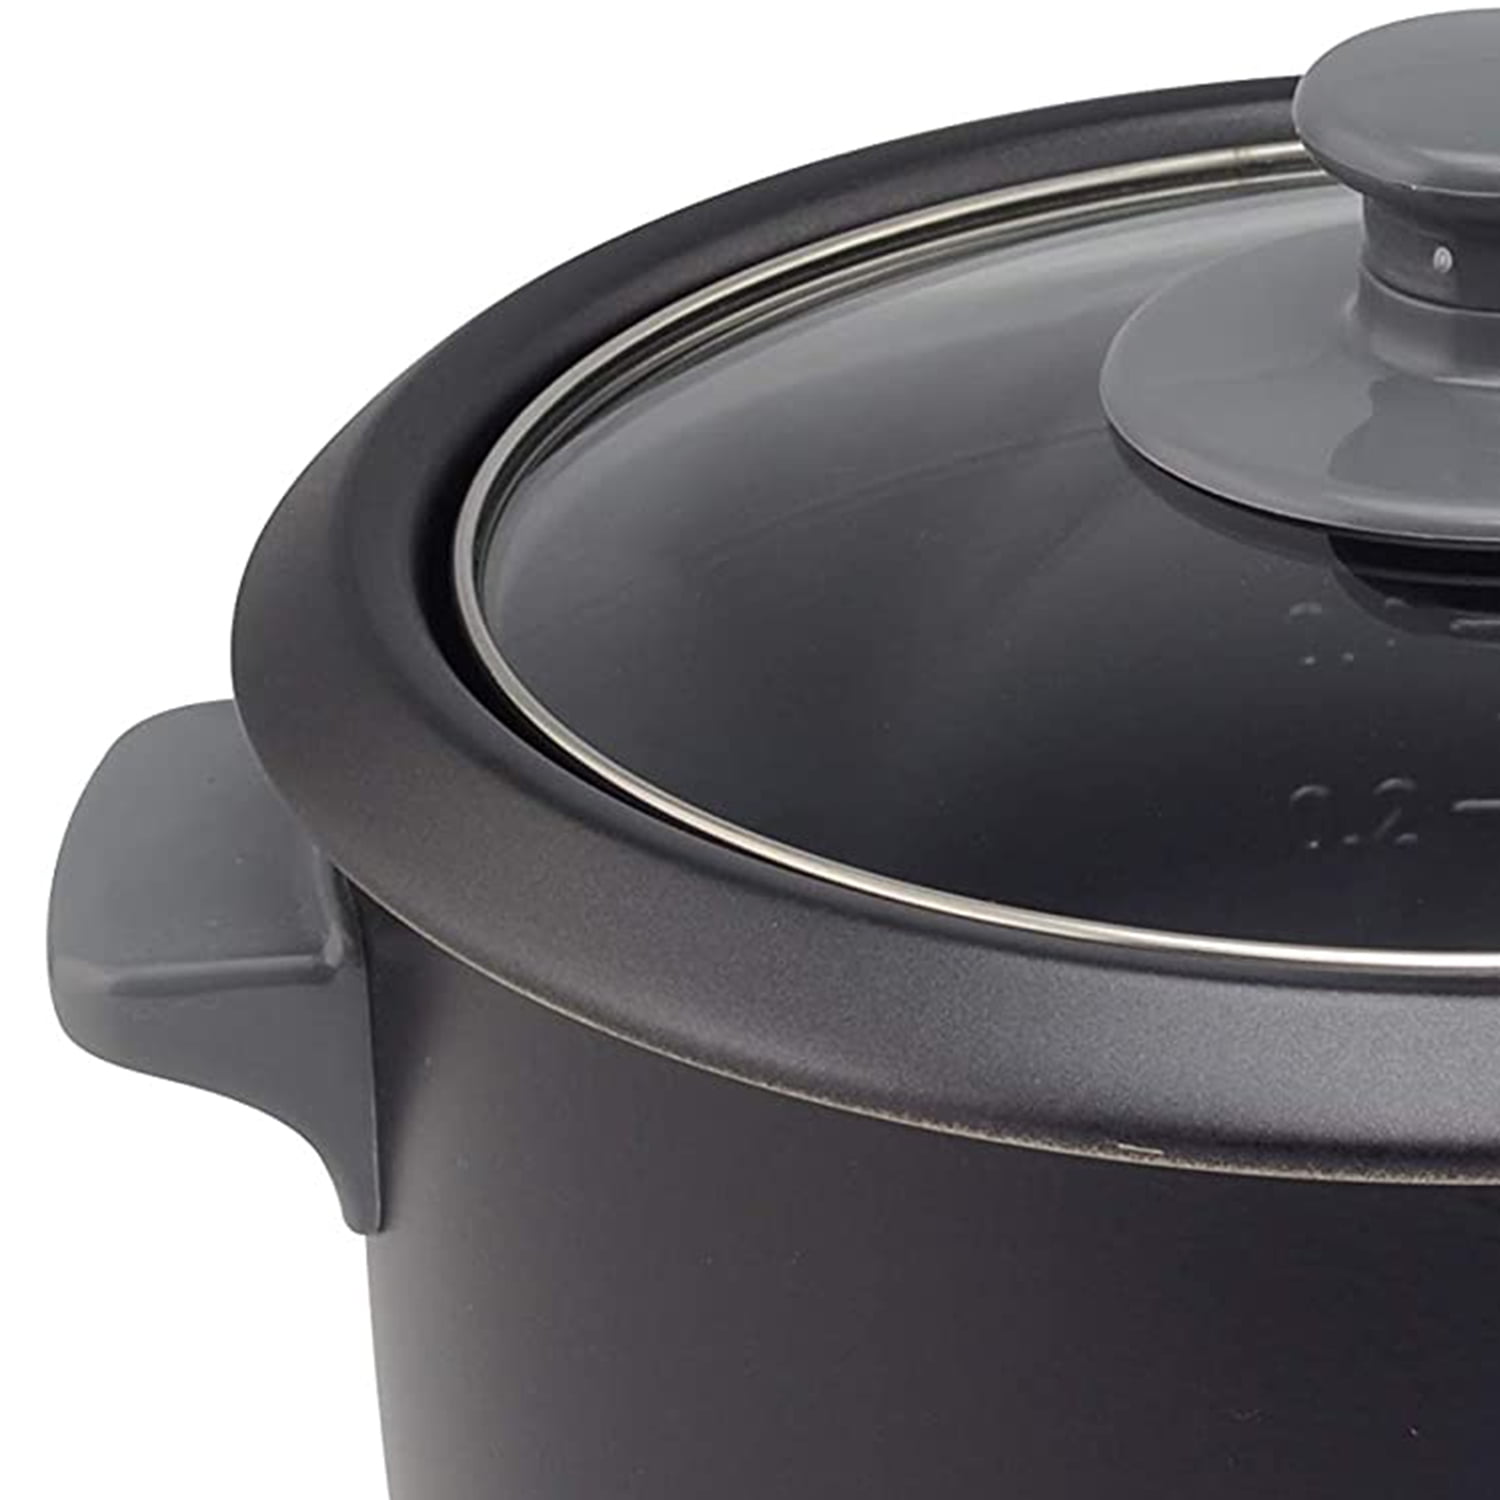 Brentwood 4 Cup Rice Cooker Black - Office Depot